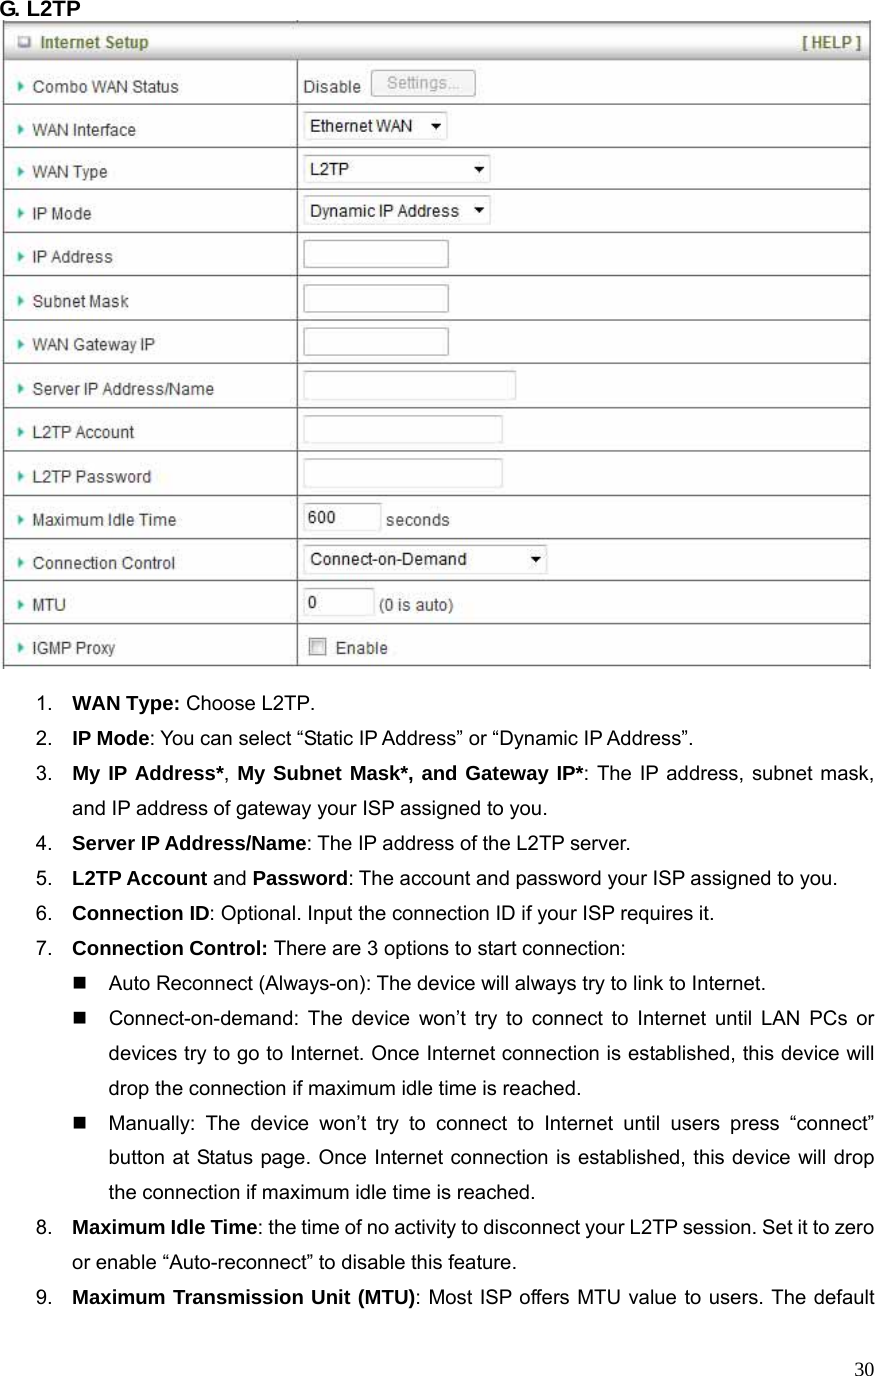  30G. L2TP     1.  WAN Type: Choose L2TP. 2.  IP Mode: You can select “Static IP Address” or “Dynamic IP Address”.   3.  My IP Address*, My Subnet Mask*, and Gateway IP*: The IP address, subnet mask, and IP address of gateway your ISP assigned to you.   4.  Server IP Address/Name: The IP address of the L2TP server. 5.  L2TP Account and Password: The account and password your ISP assigned to you. 6.  Connection ID: Optional. Input the connection ID if your ISP requires it.   7.  Connection Control: There are 3 options to start connection:     Auto Reconnect (Always-on): The device will always try to link to Internet.       Connect-on-demand: The device won’t try to connect to Internet until LAN PCs or devices try to go to Internet. Once Internet connection is established, this device will drop the connection if maximum idle time is reached.   Manually: The device won’t try to connect to Internet until users press “connect” button at Status page. Once Internet connection is established, this device will drop the connection if maximum idle time is reached. 8.  Maximum Idle Time: the time of no activity to disconnect your L2TP session. Set it to zero or enable “Auto-reconnect” to disable this feature. 9.  Maximum Transmission Unit (MTU): Most ISP offers MTU value to users. The default 